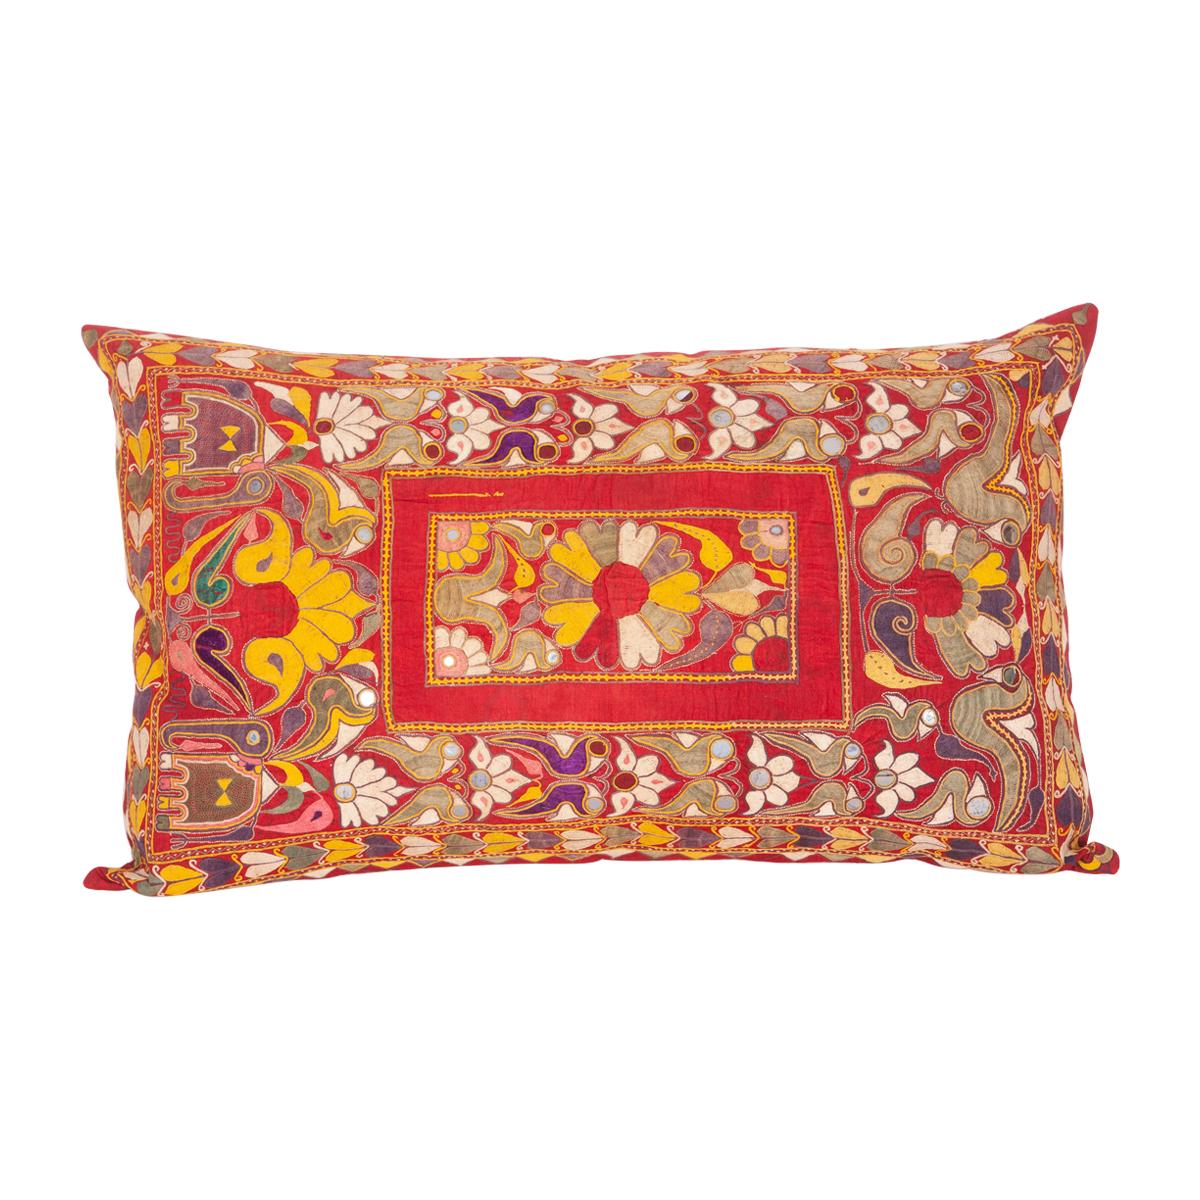 Pillow Case Made from an Early 20th Century Embroidery from Rajastan